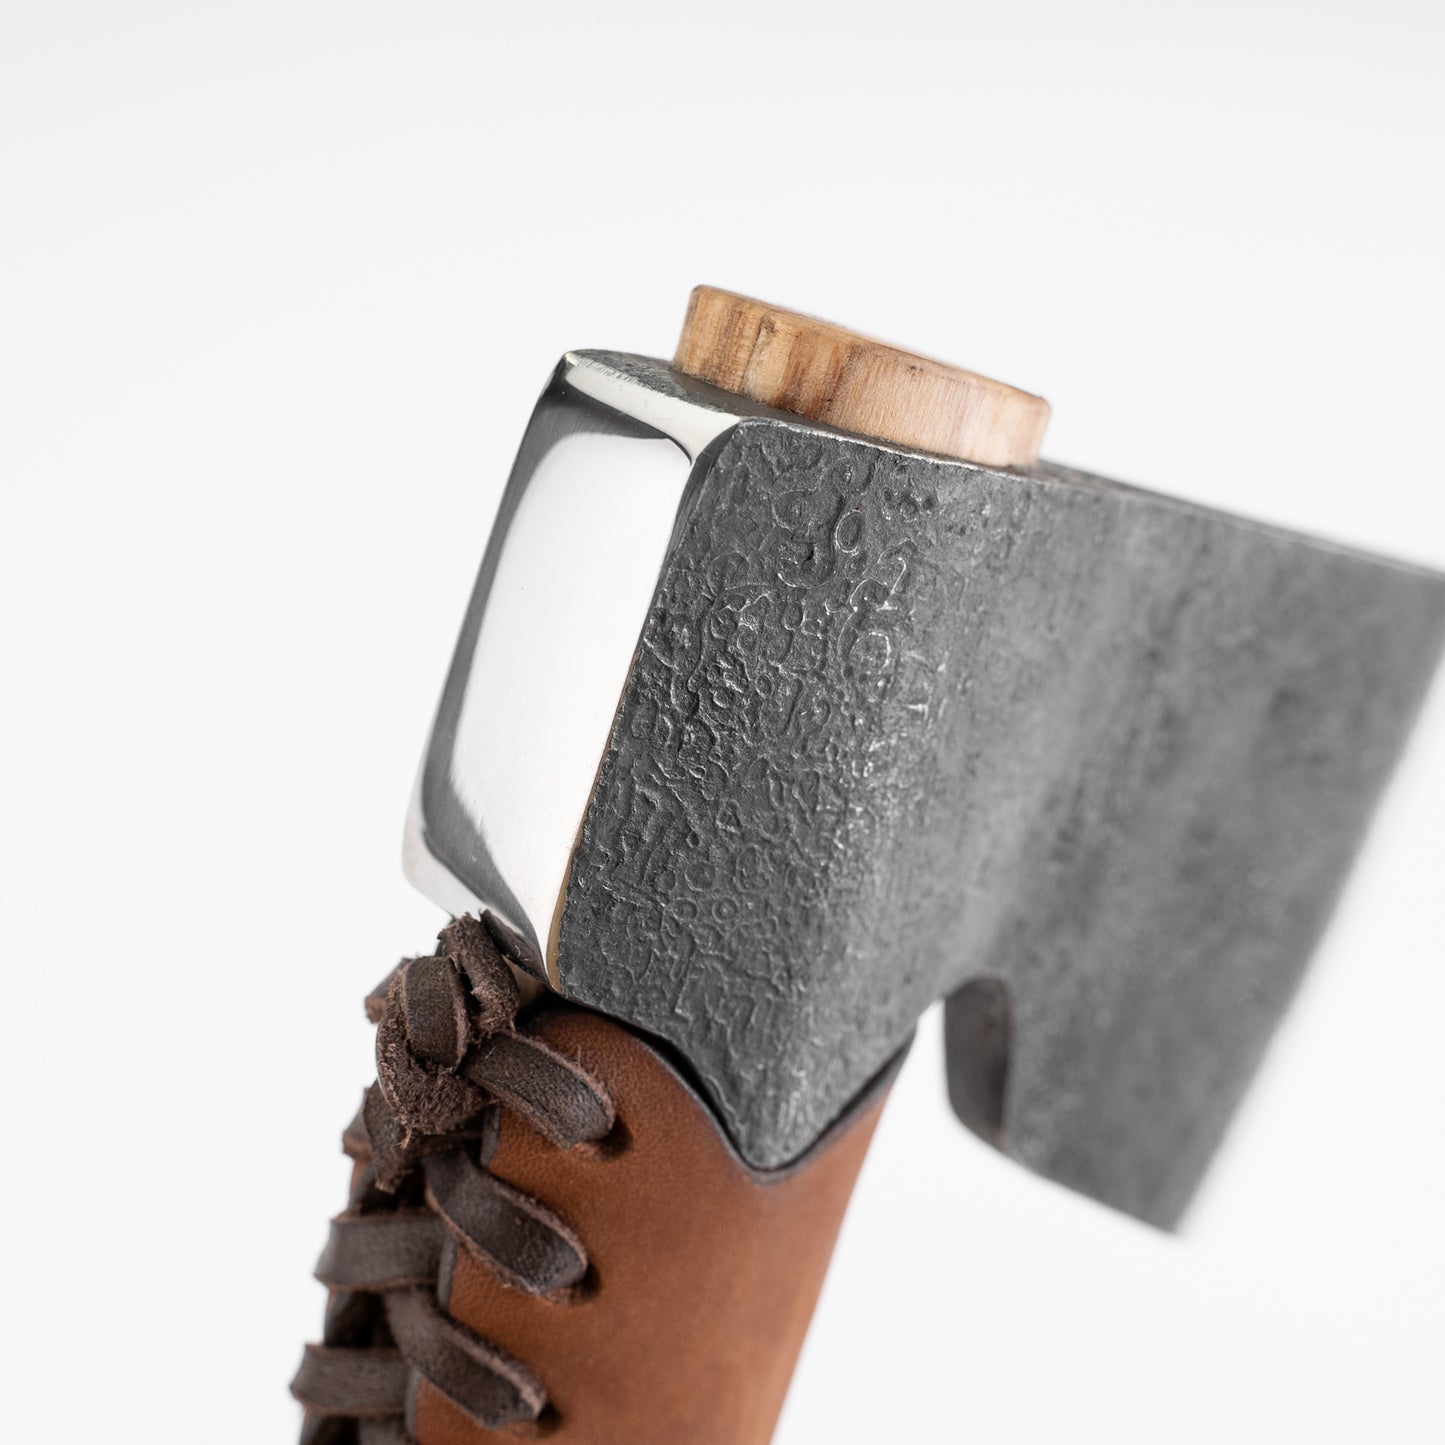 Small forest axe